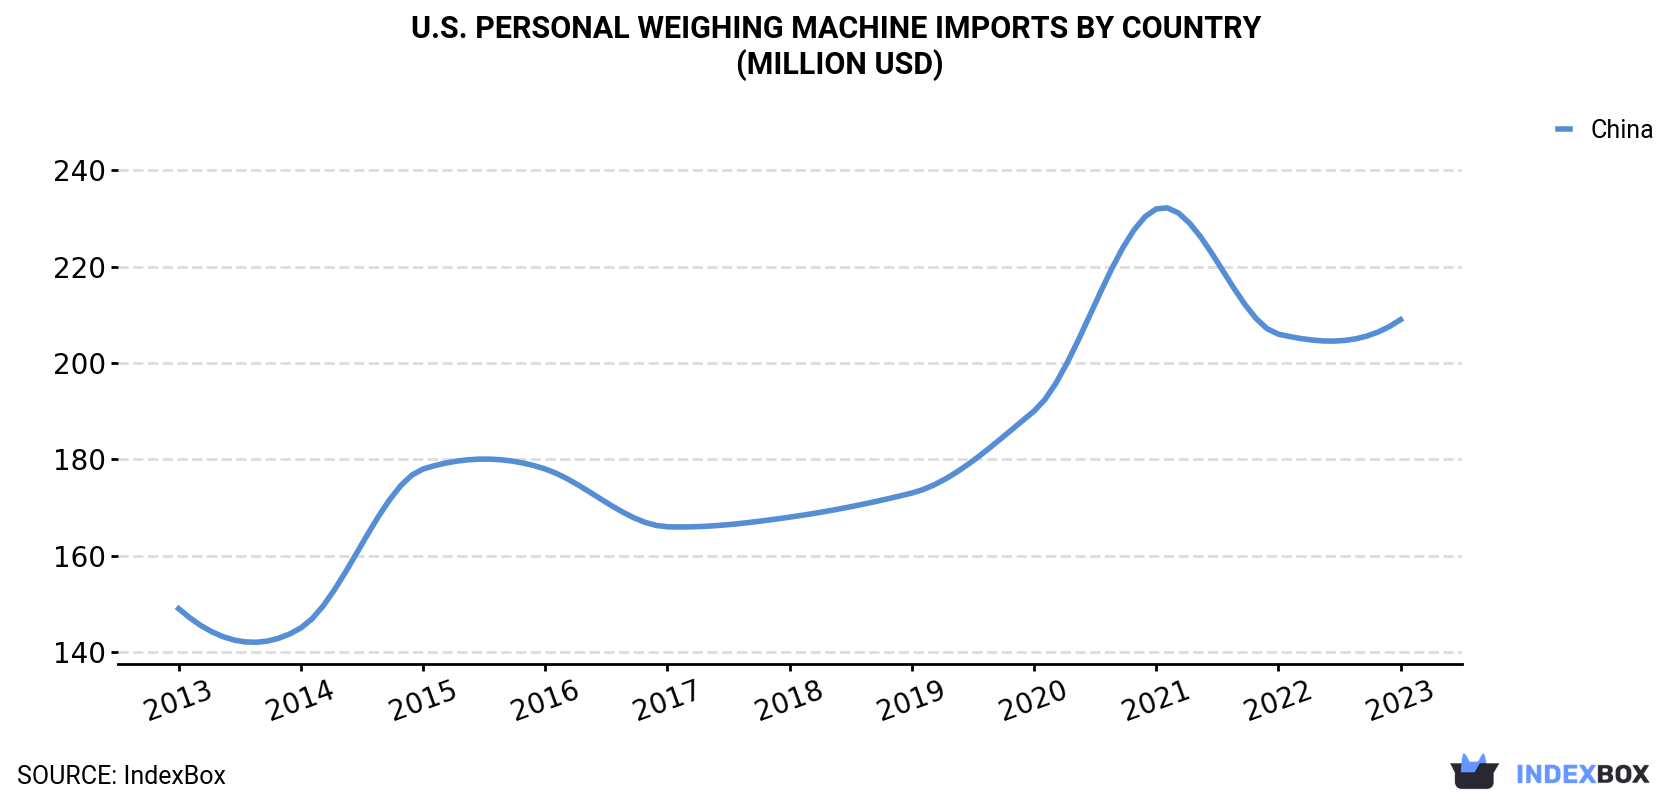 U.S. Personal Weighing Machine Imports By Country (Million USD)